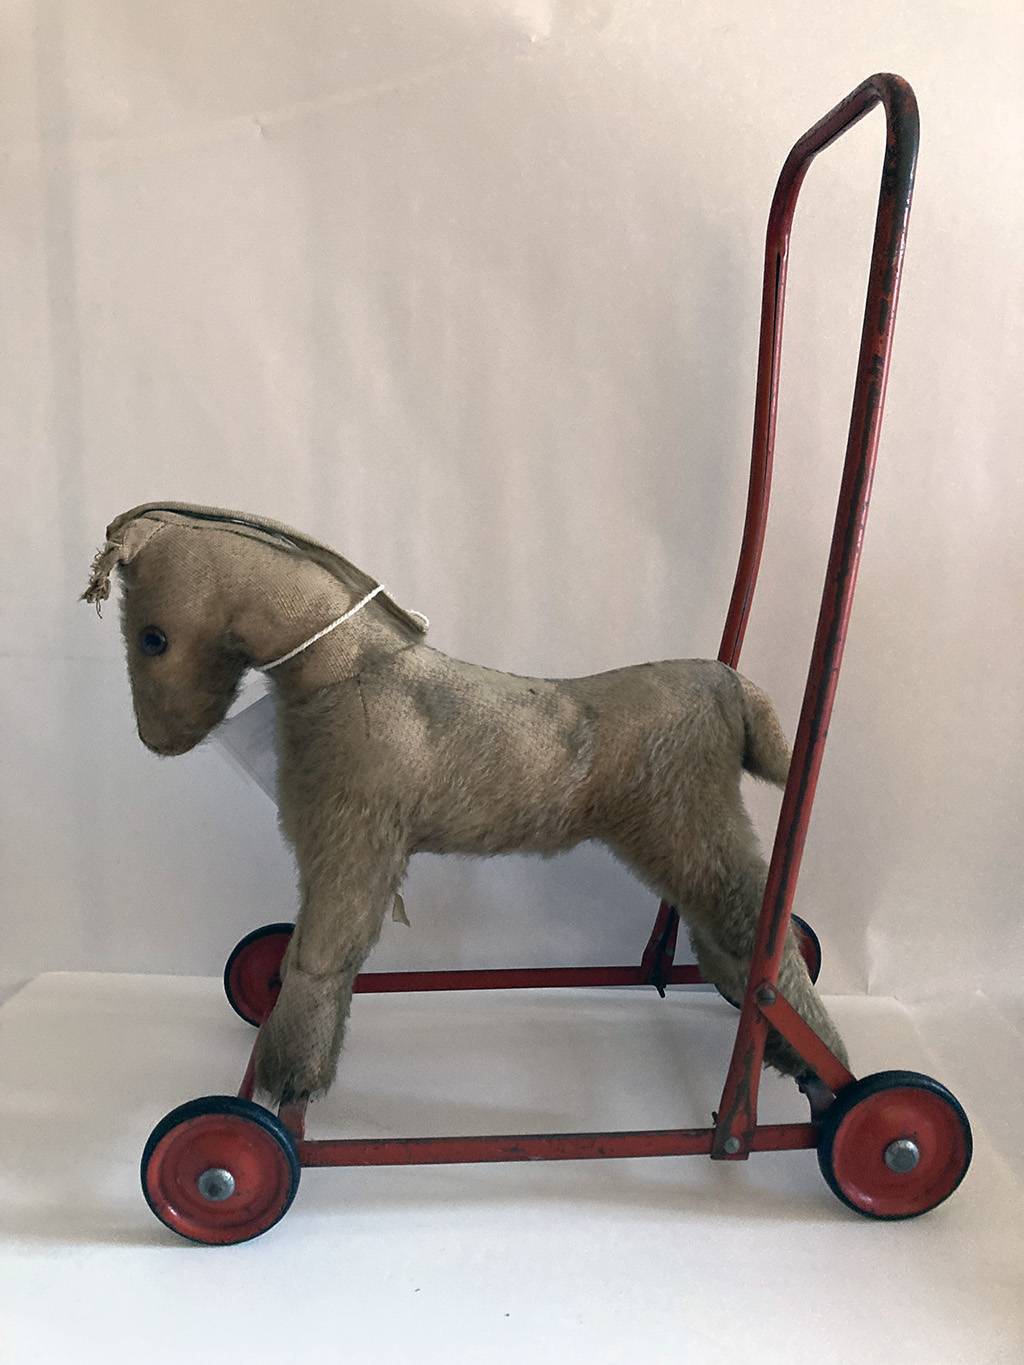 A pull along toy horse with 4 wheels and a large  red metal handle